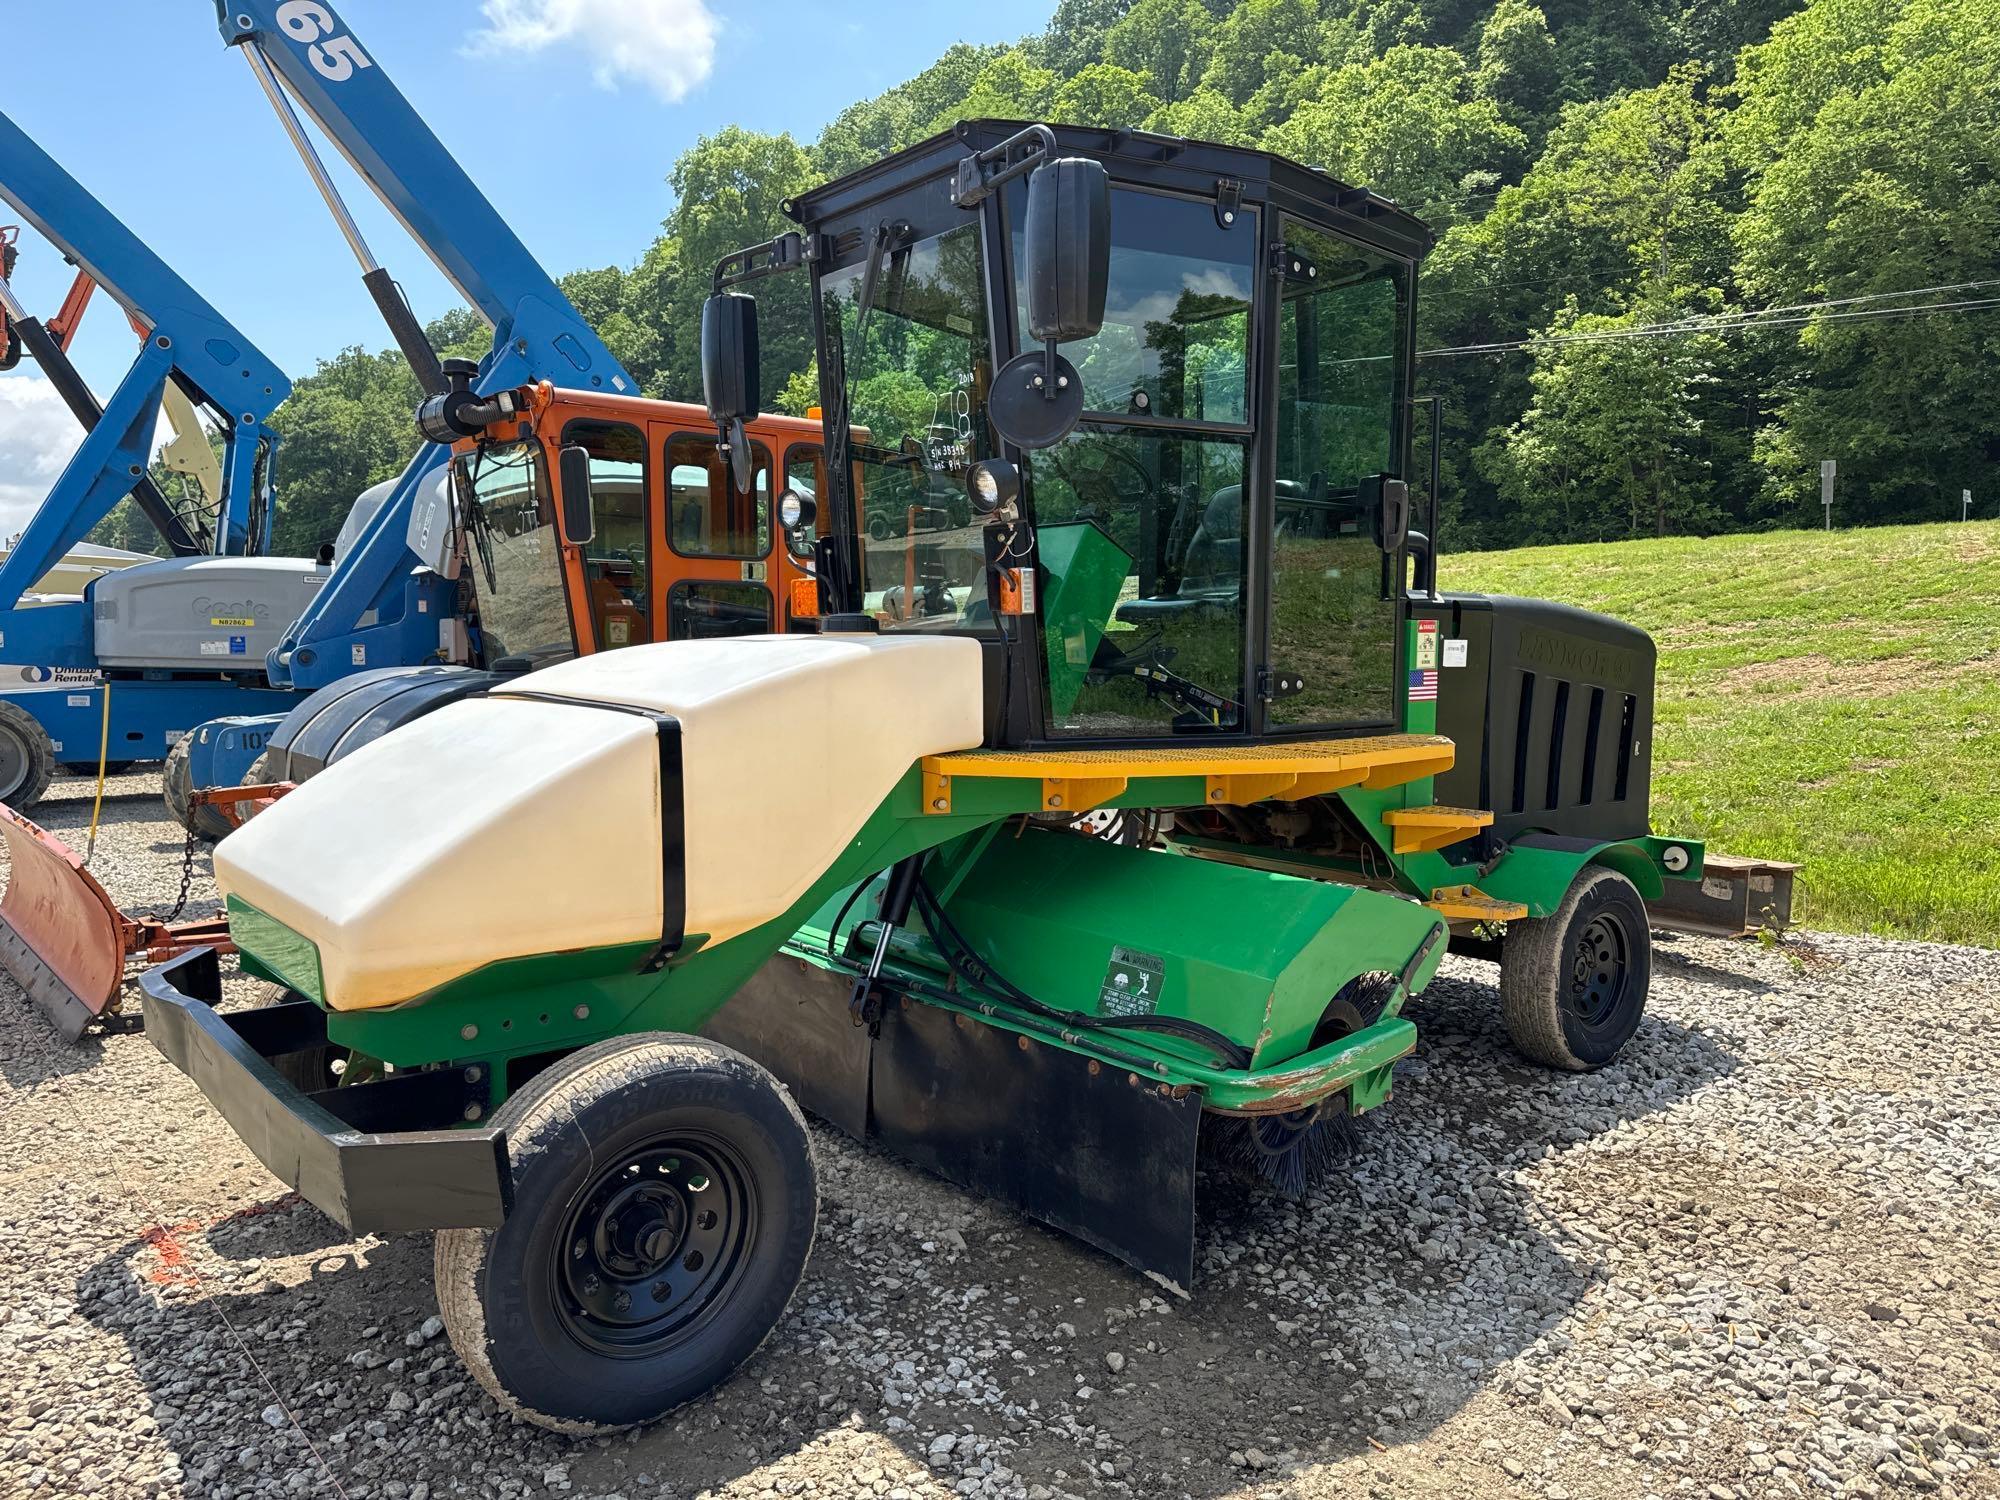 2018 LAYMOR SM450ST SWEEPER SN38398 powered by diesel engine, equipped with EROPS, air, 8ft.